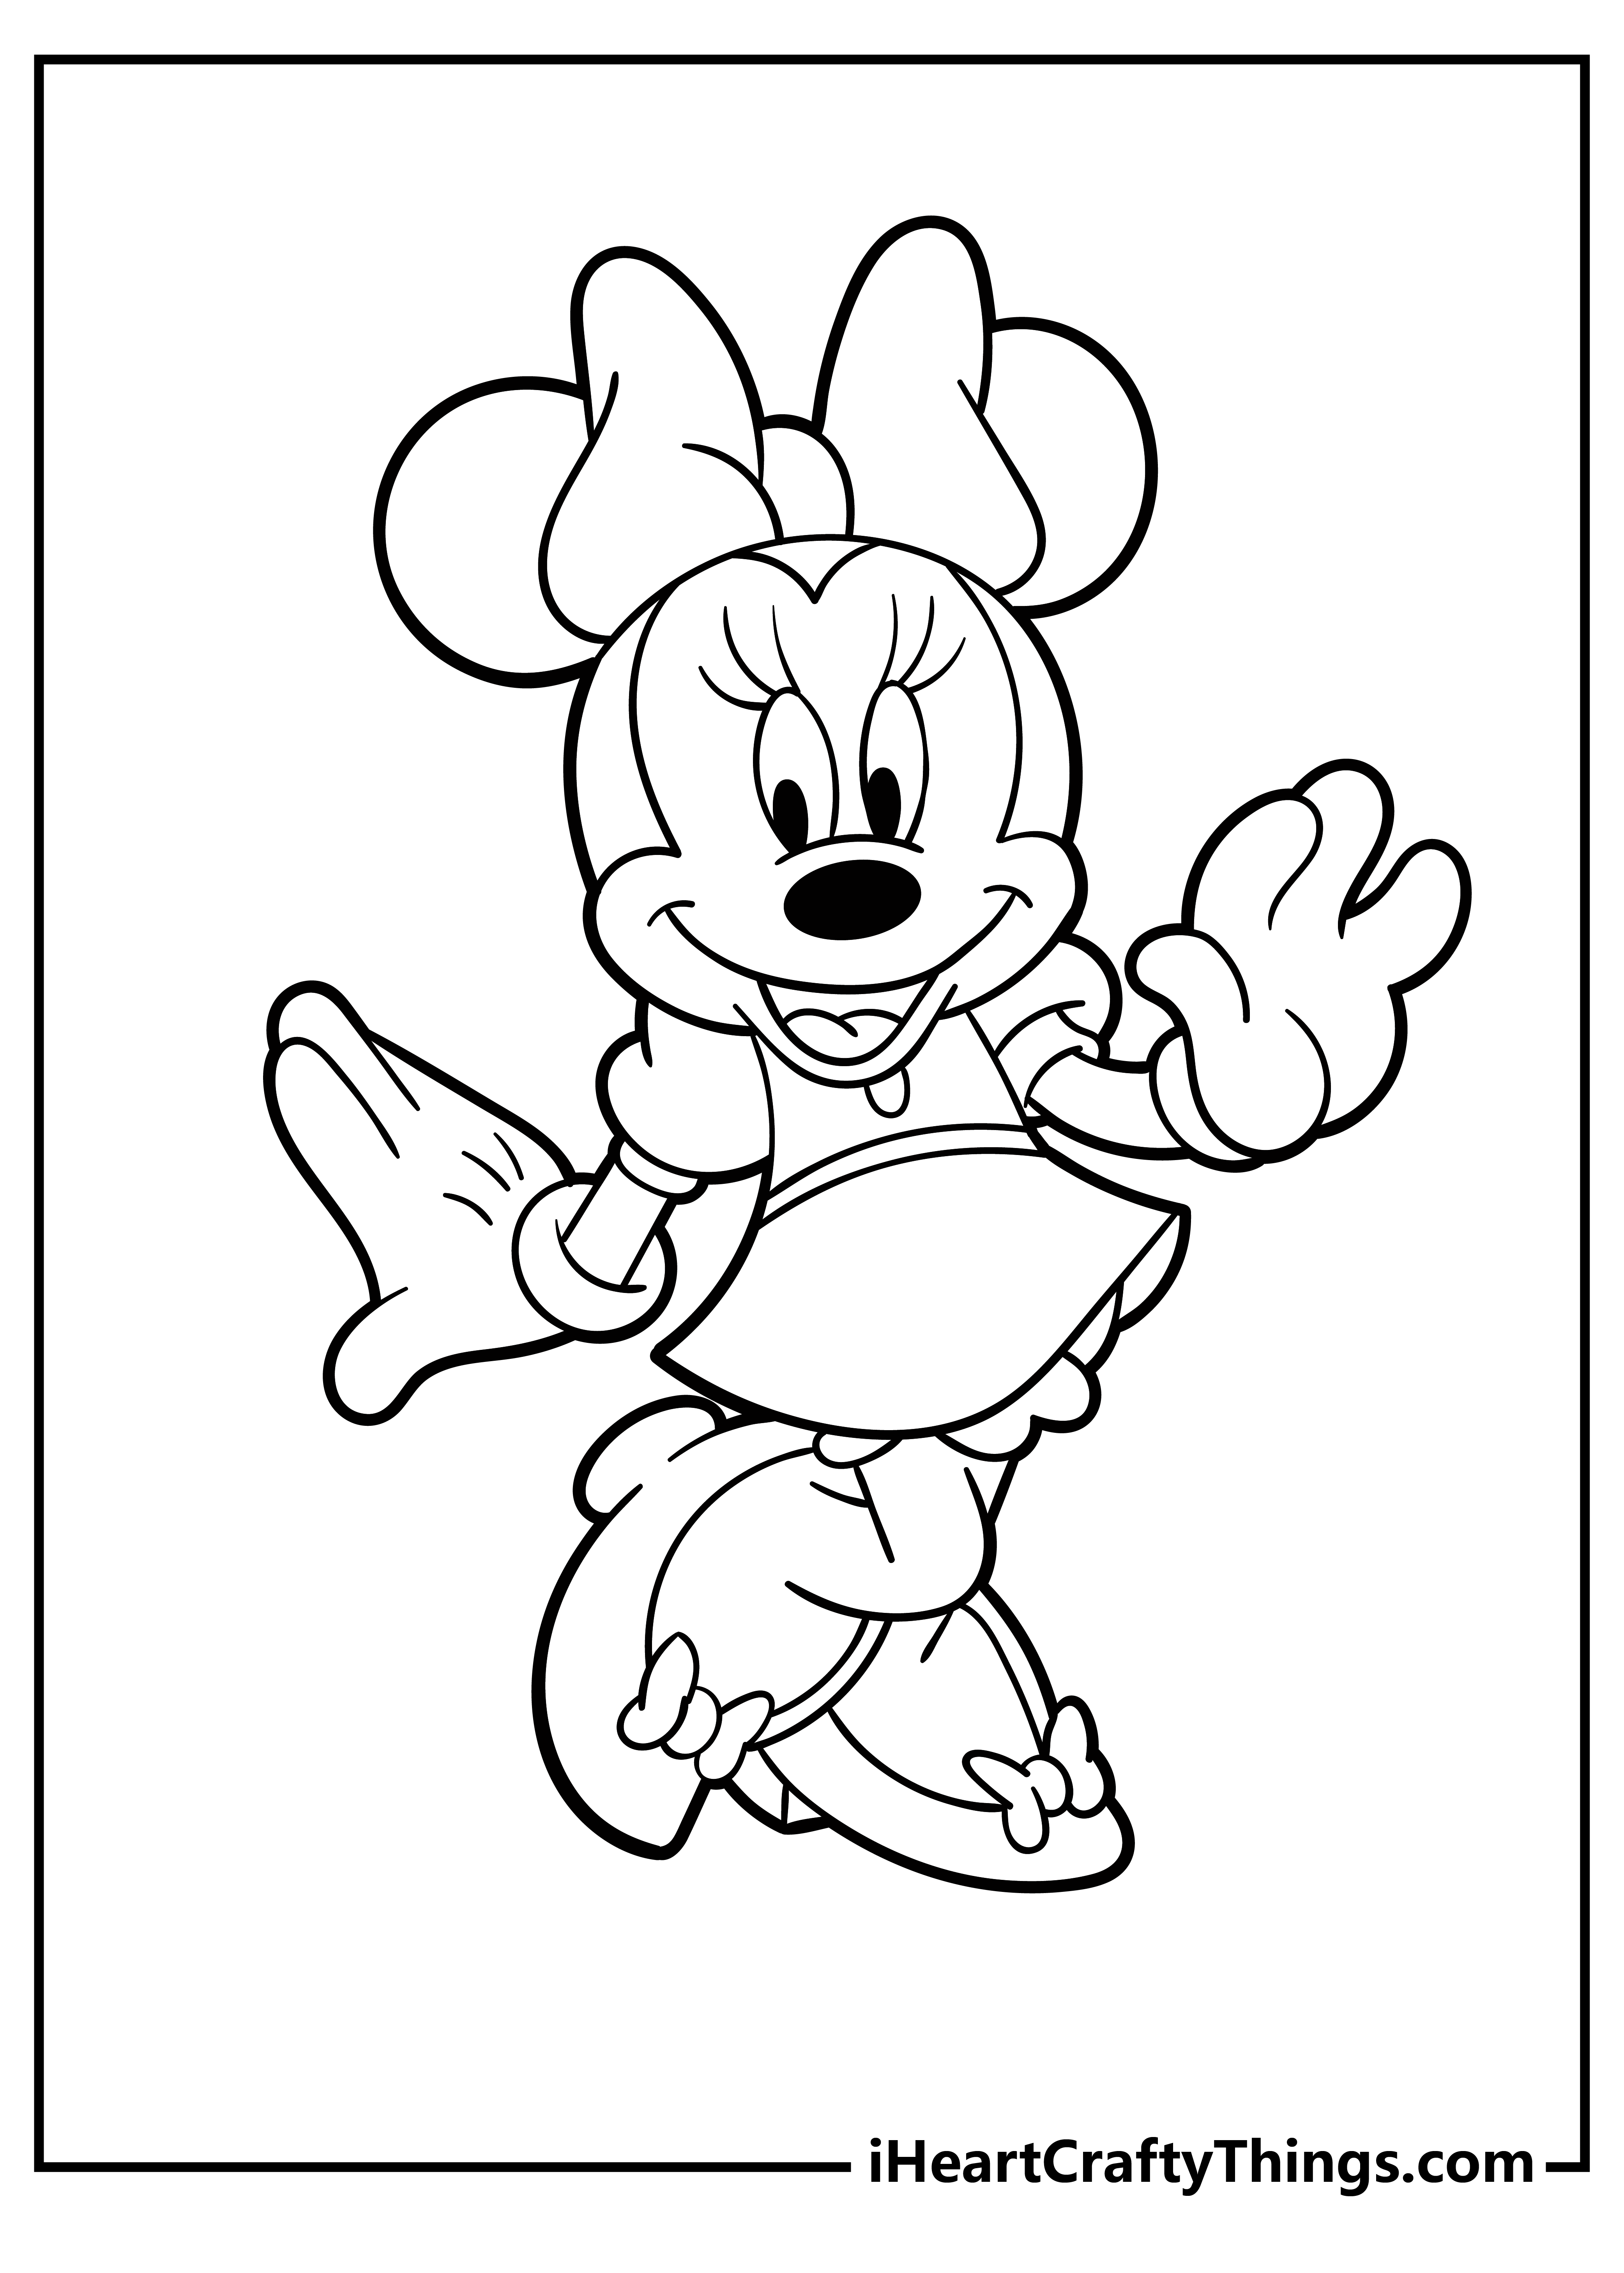 Minnie mouse coloring pages free printables